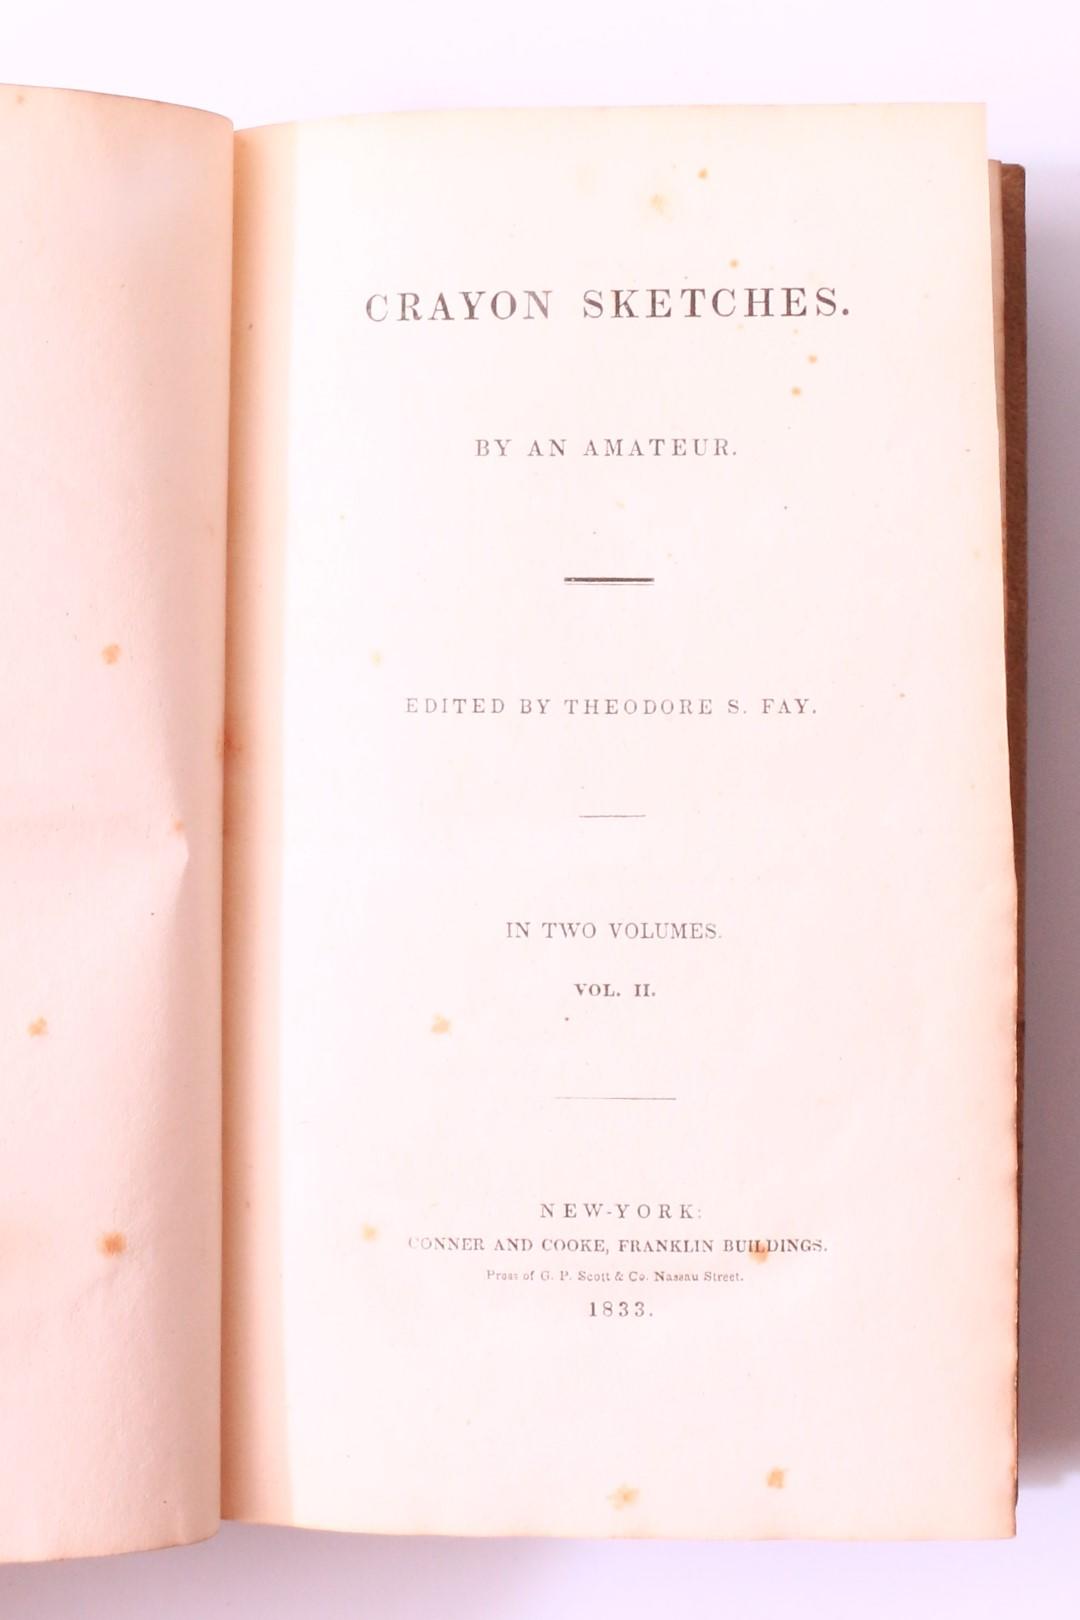 [William Cox] Theodore S. Fay [ed.] - Crayon Sketches: By an Amateur - Conner & Cooke, 1833, First Edition.